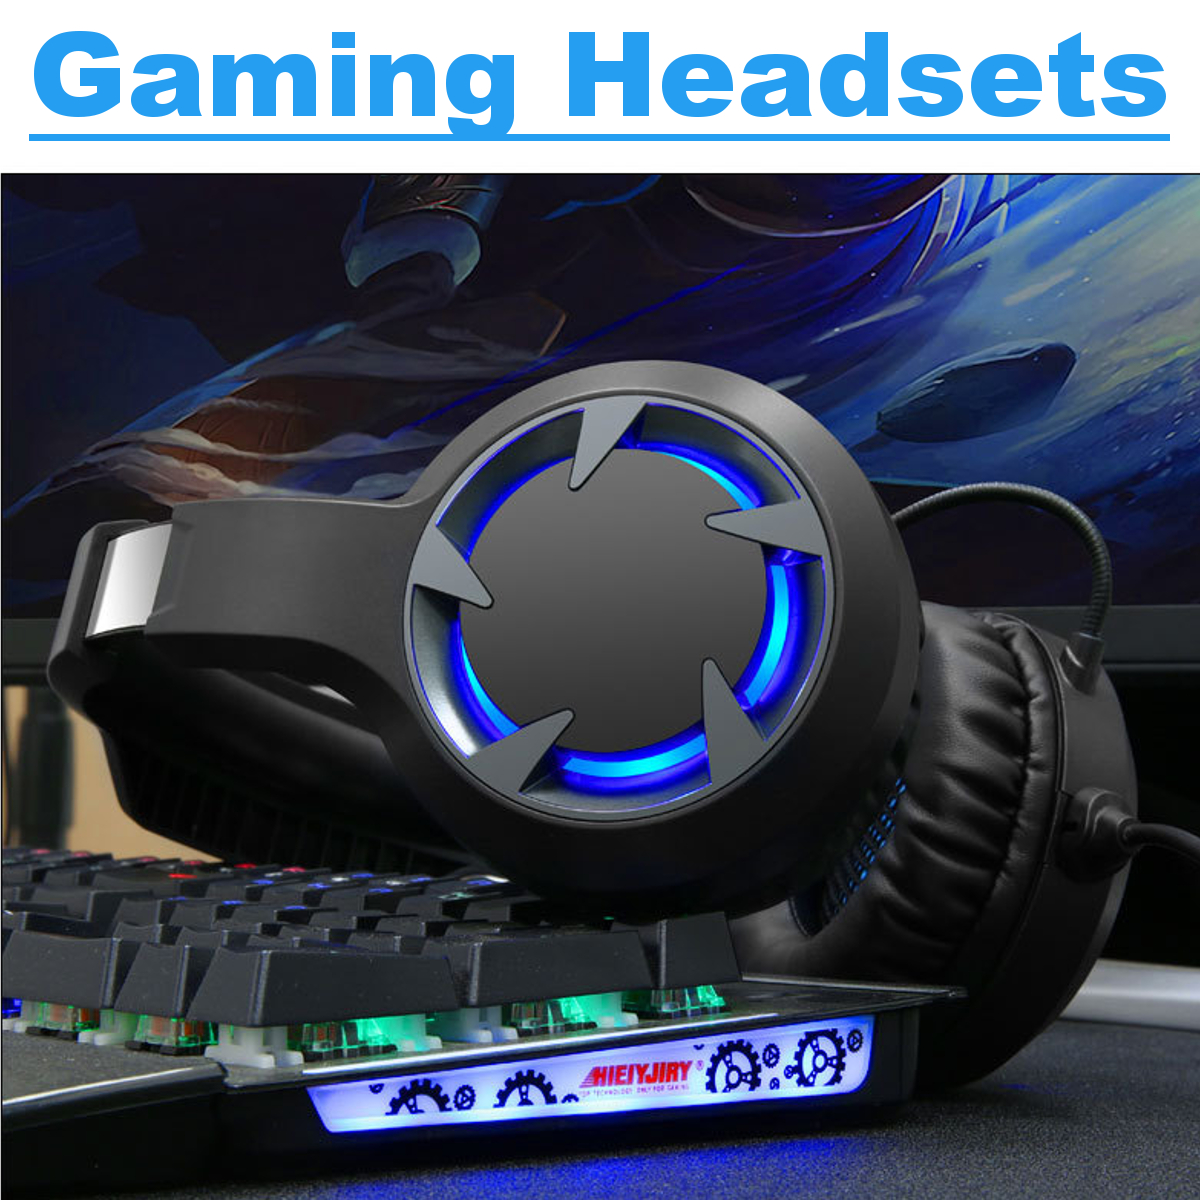 Bakeey Wired Headphones Stereo Bass Surround Gaming Headset for PS4 New for Xbox One PC with Mic